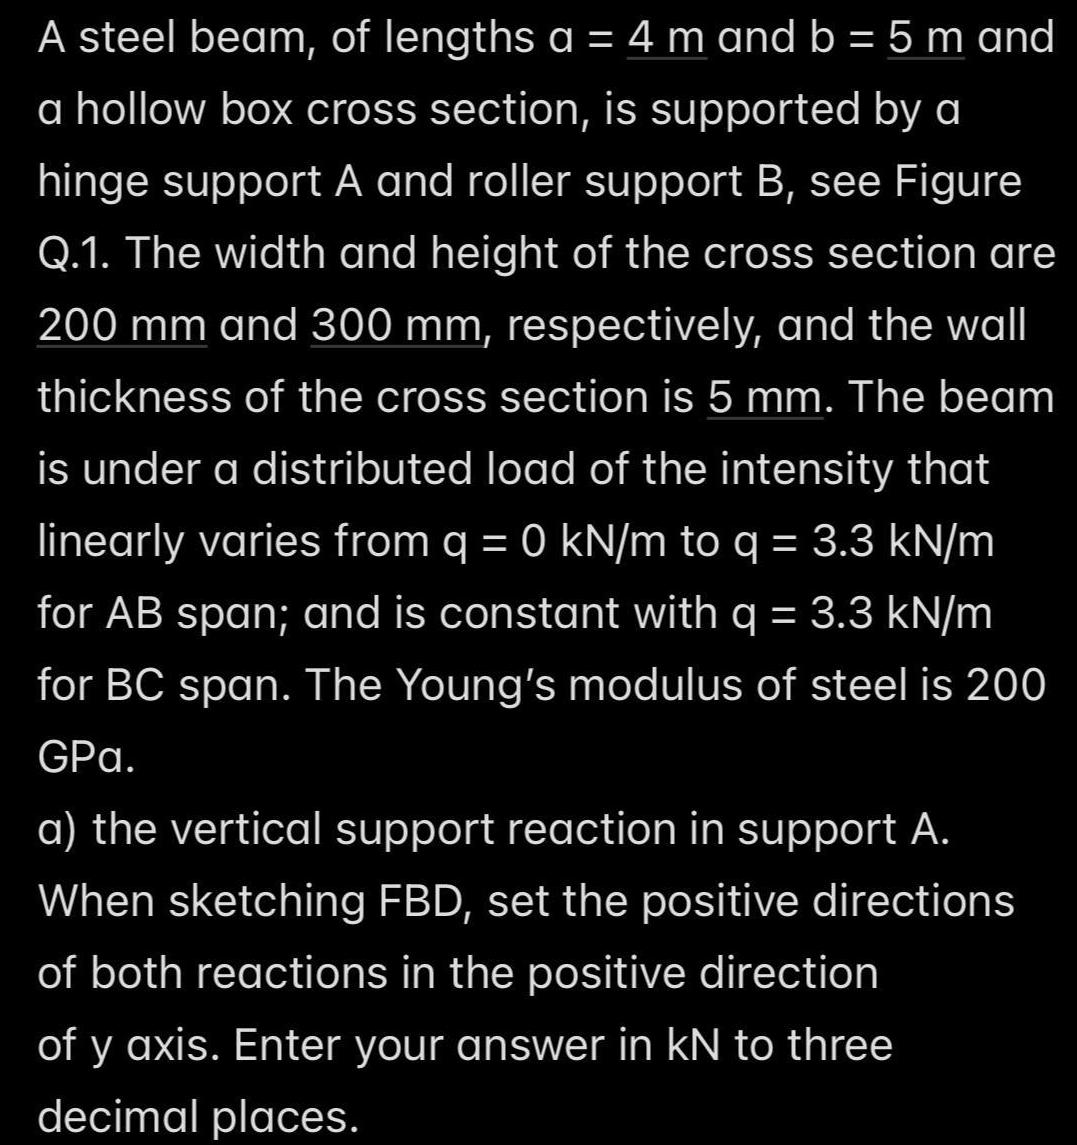 A steel beam, of lengths a = 4 m and b = 5 m and a hollow box cross section, is supported by a hinge support